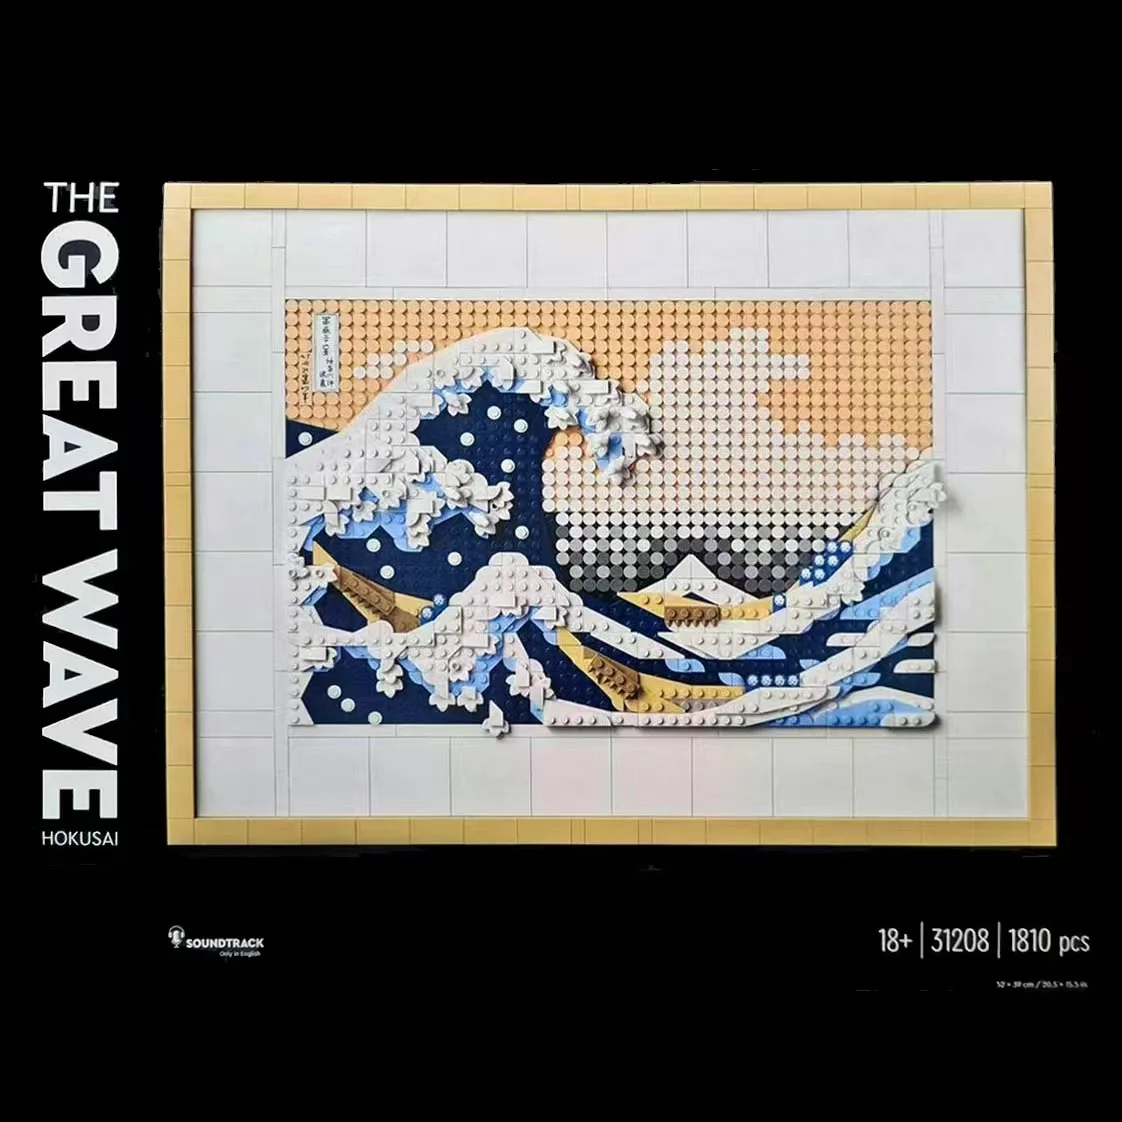 

Compatible 31208 21333 hokusai the great wave Building Blocks Art Painting Bricks Moc Ideas Home Decorae Education Toy Gift